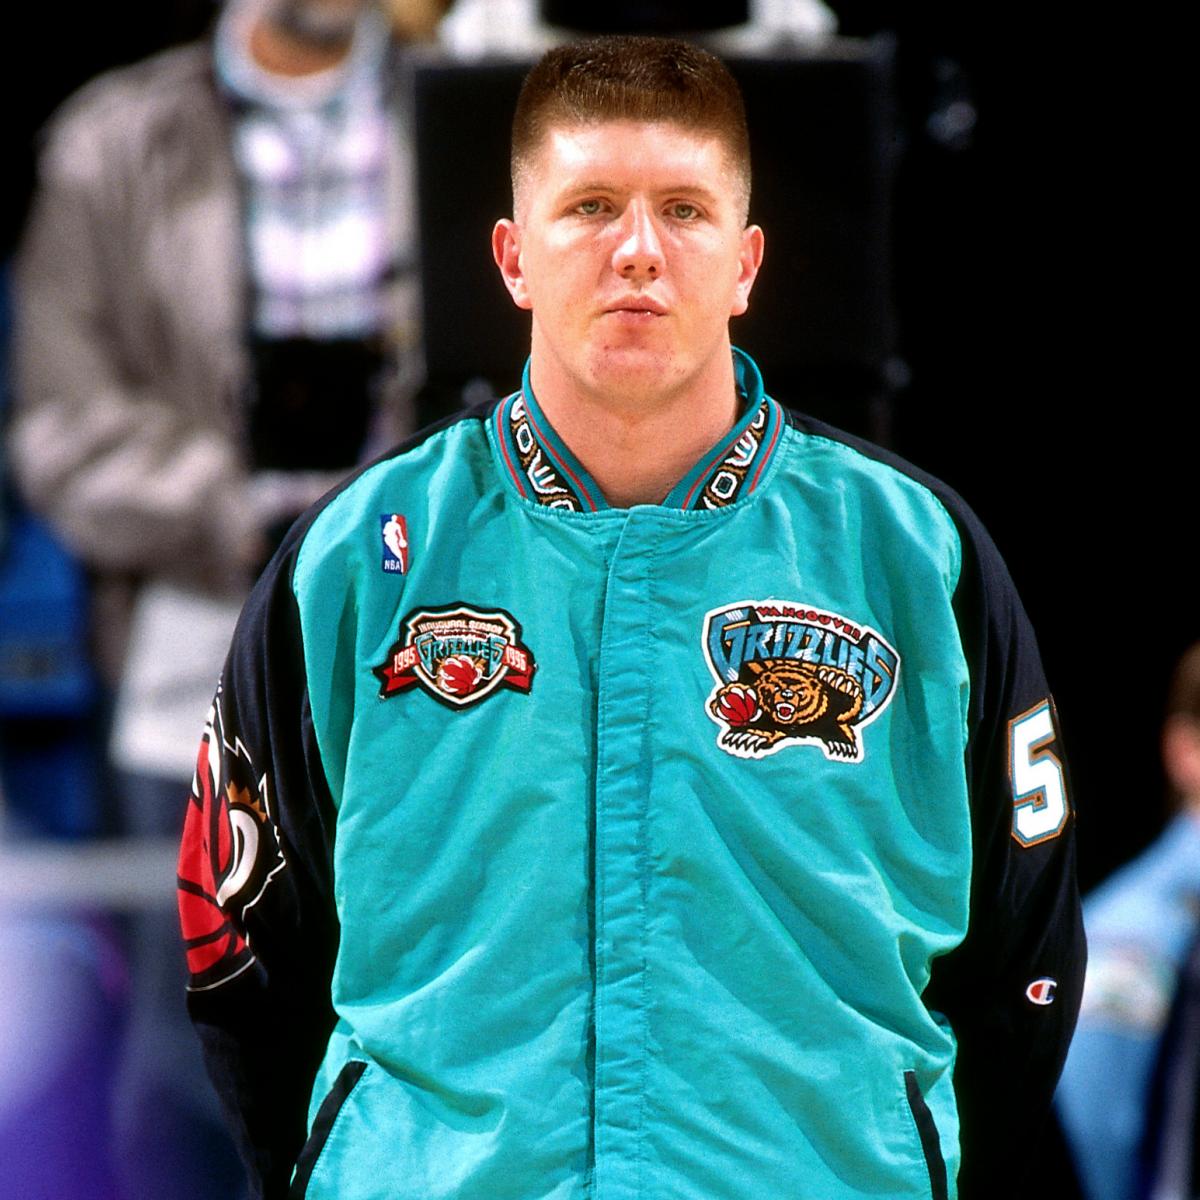 Bryant Reeves Vancouver Grizzlies Vintage Champion Basketball 